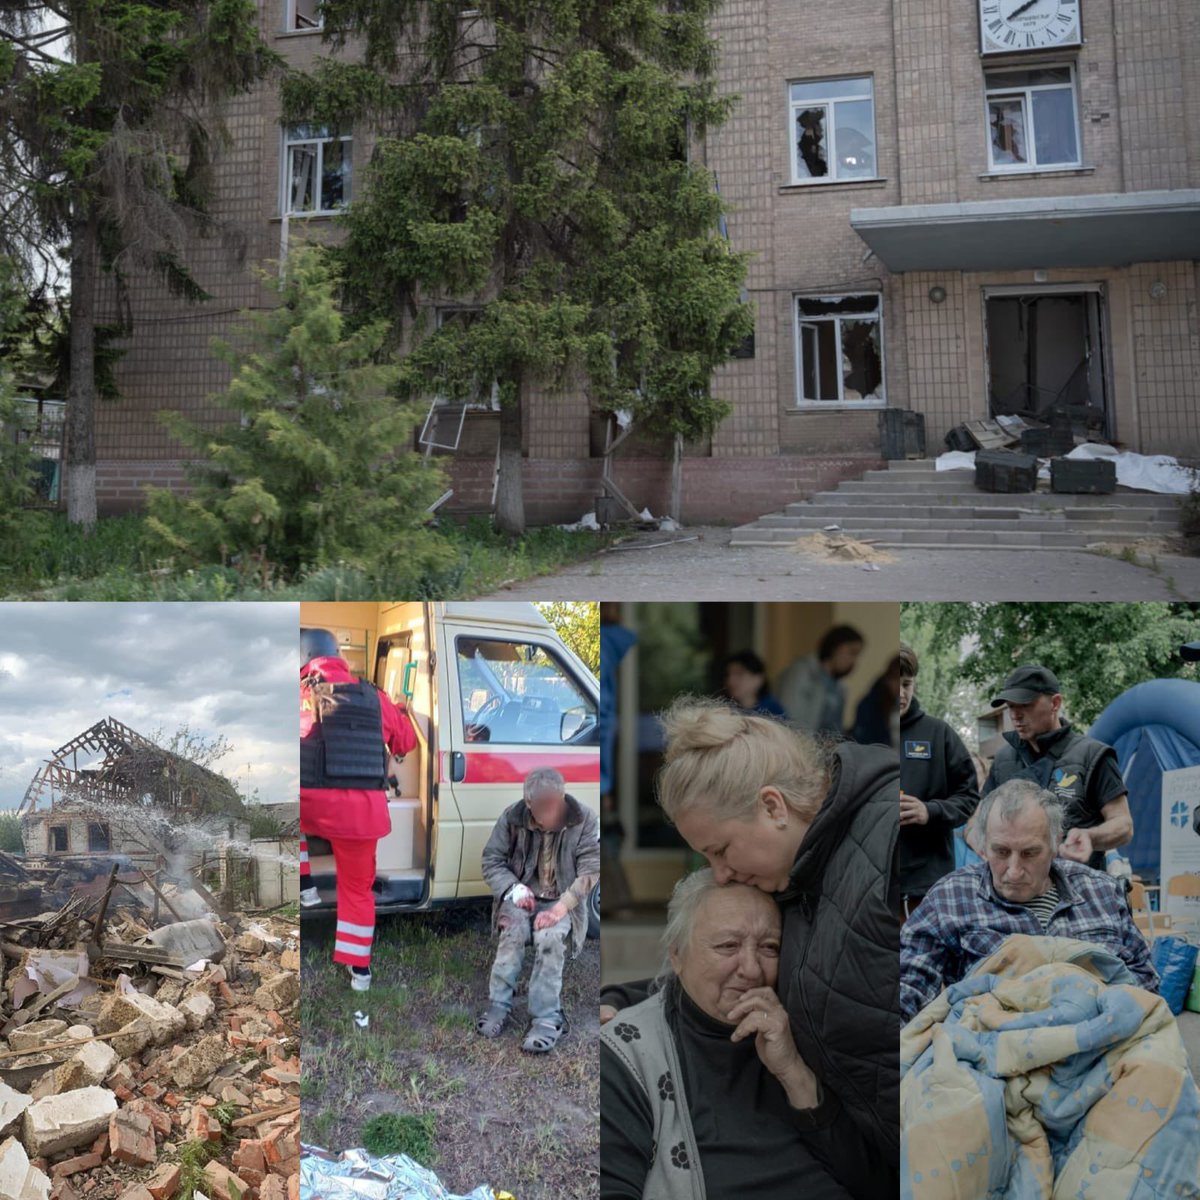 During the past day, 5 civilians were killed and 13 injured, including 1 child, due to shelling in Ukraine. Kharkiv region was attacked the most aggressively. Dozens of private homes there have been destroyed. Additionally, overnight and in the morning, aviation struck in…